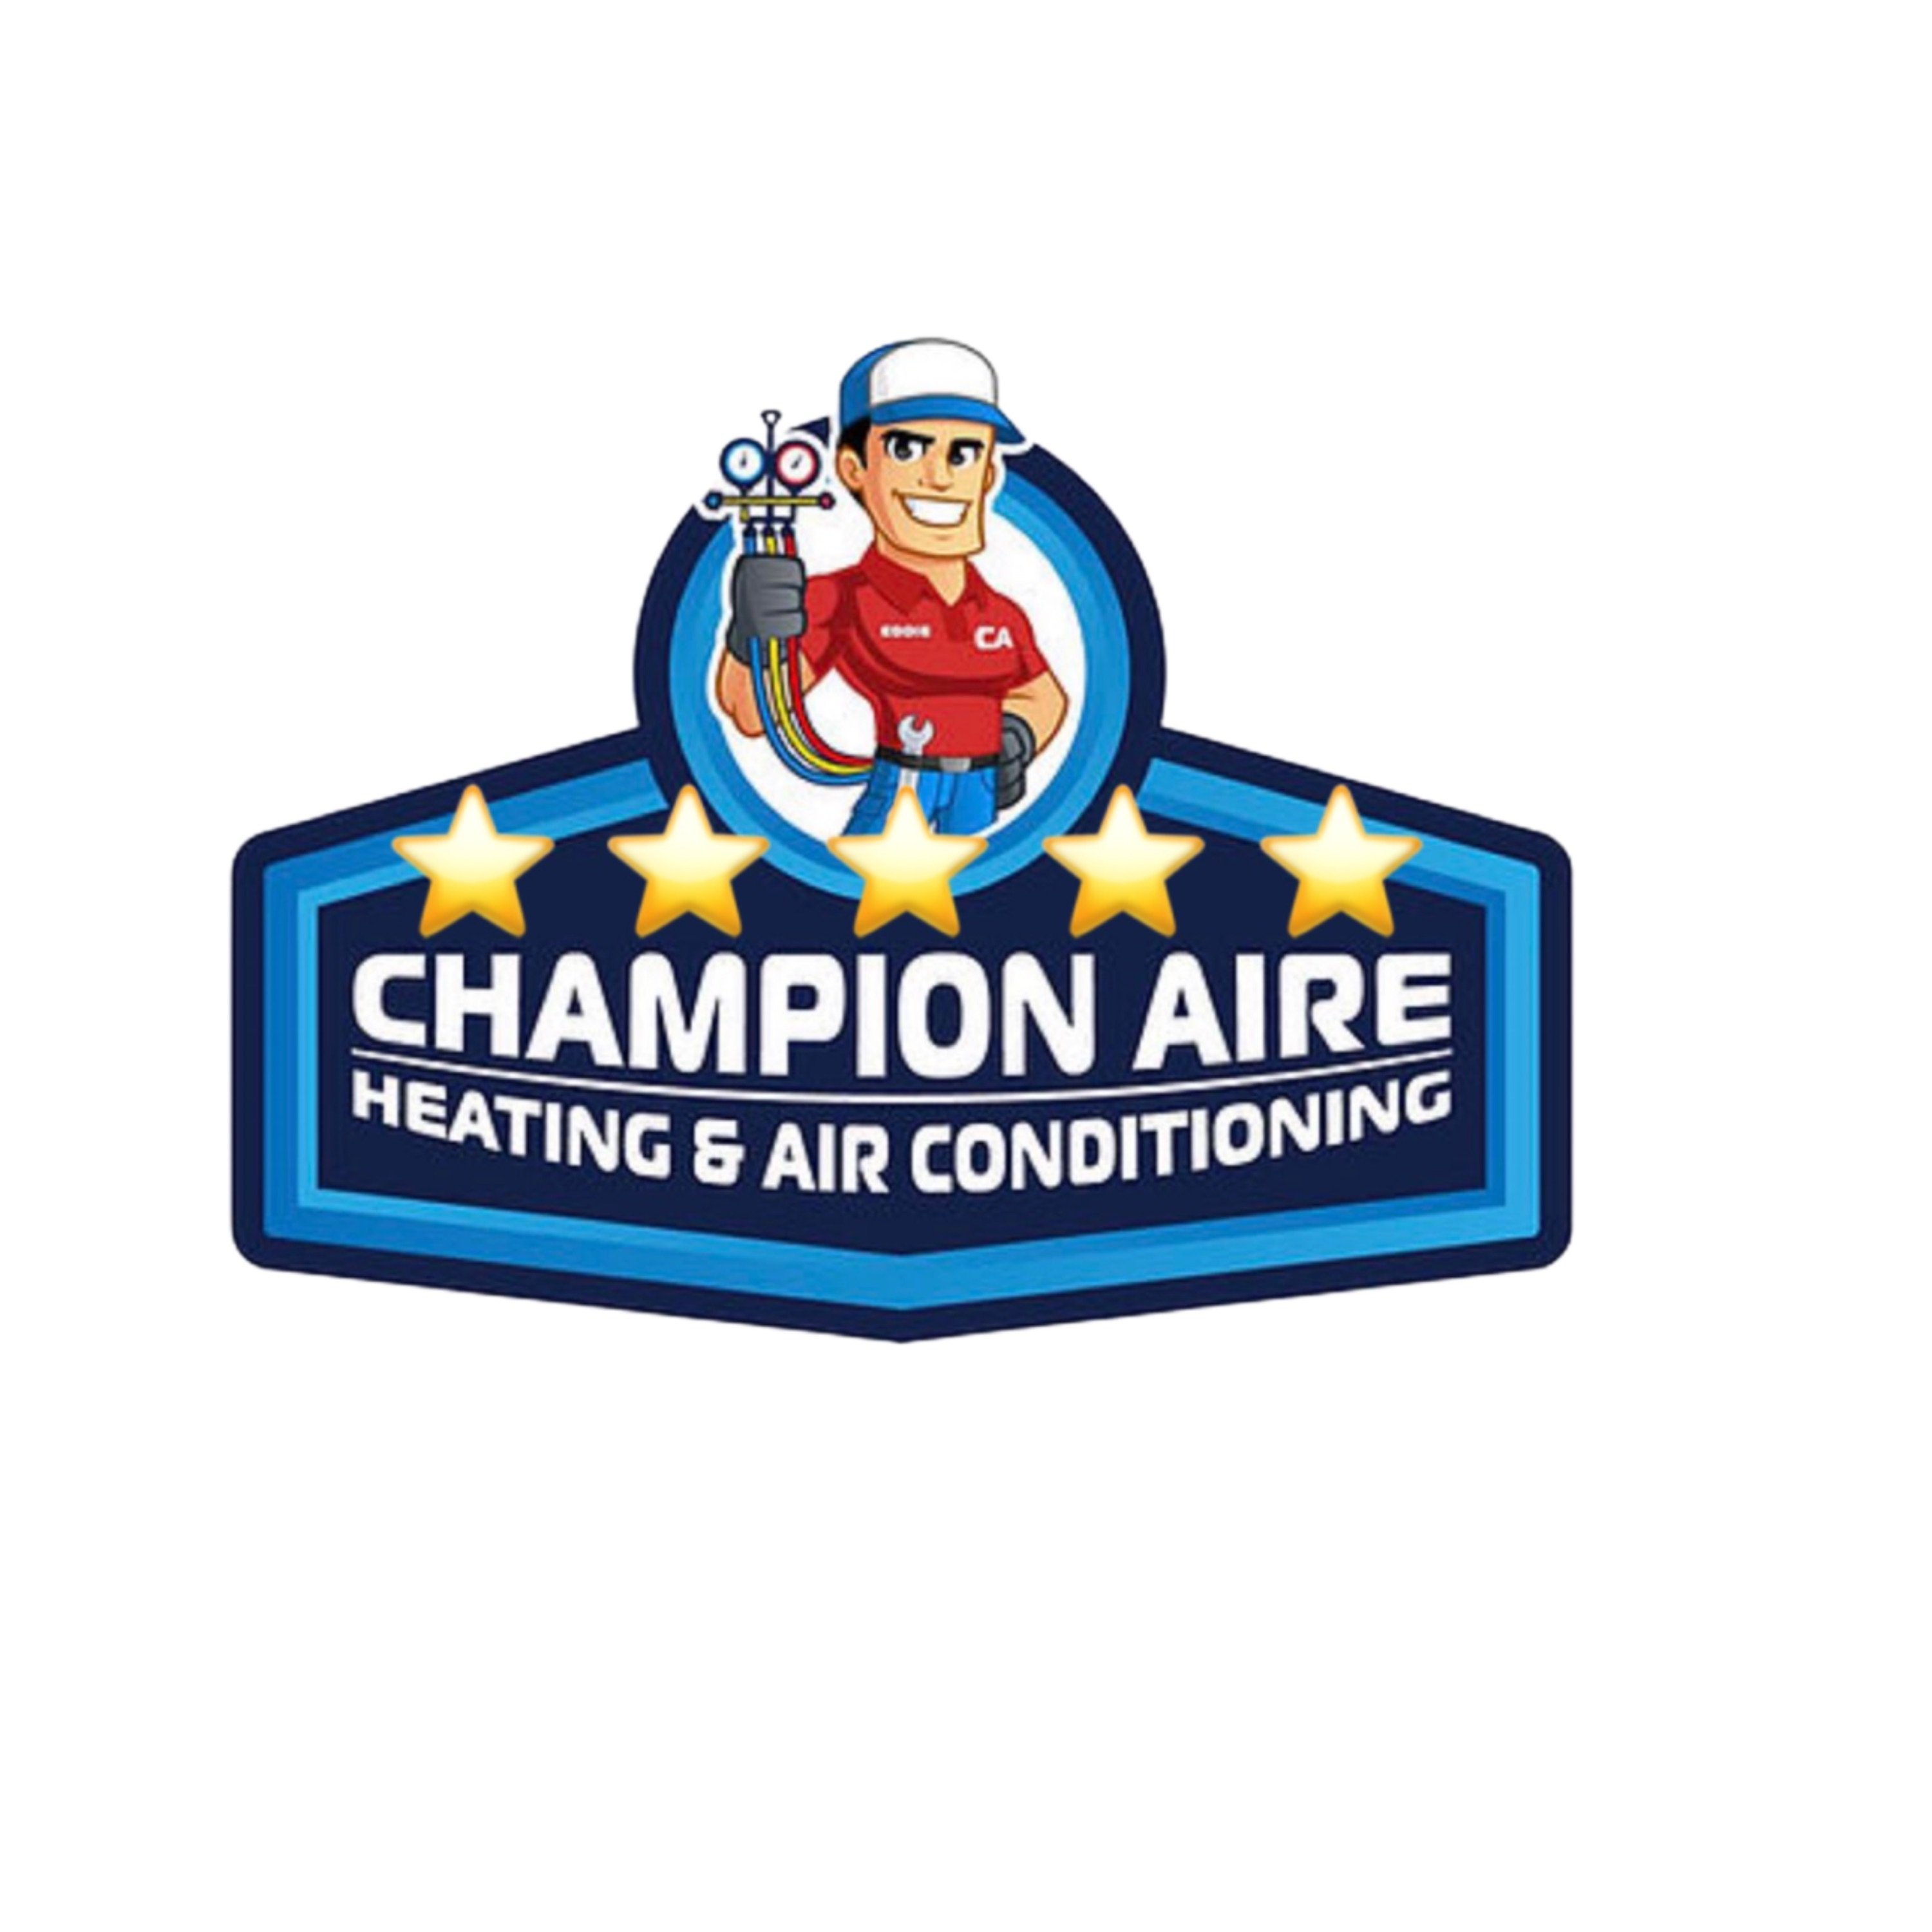 Champion Aire Heating and Air Conditioning Logo